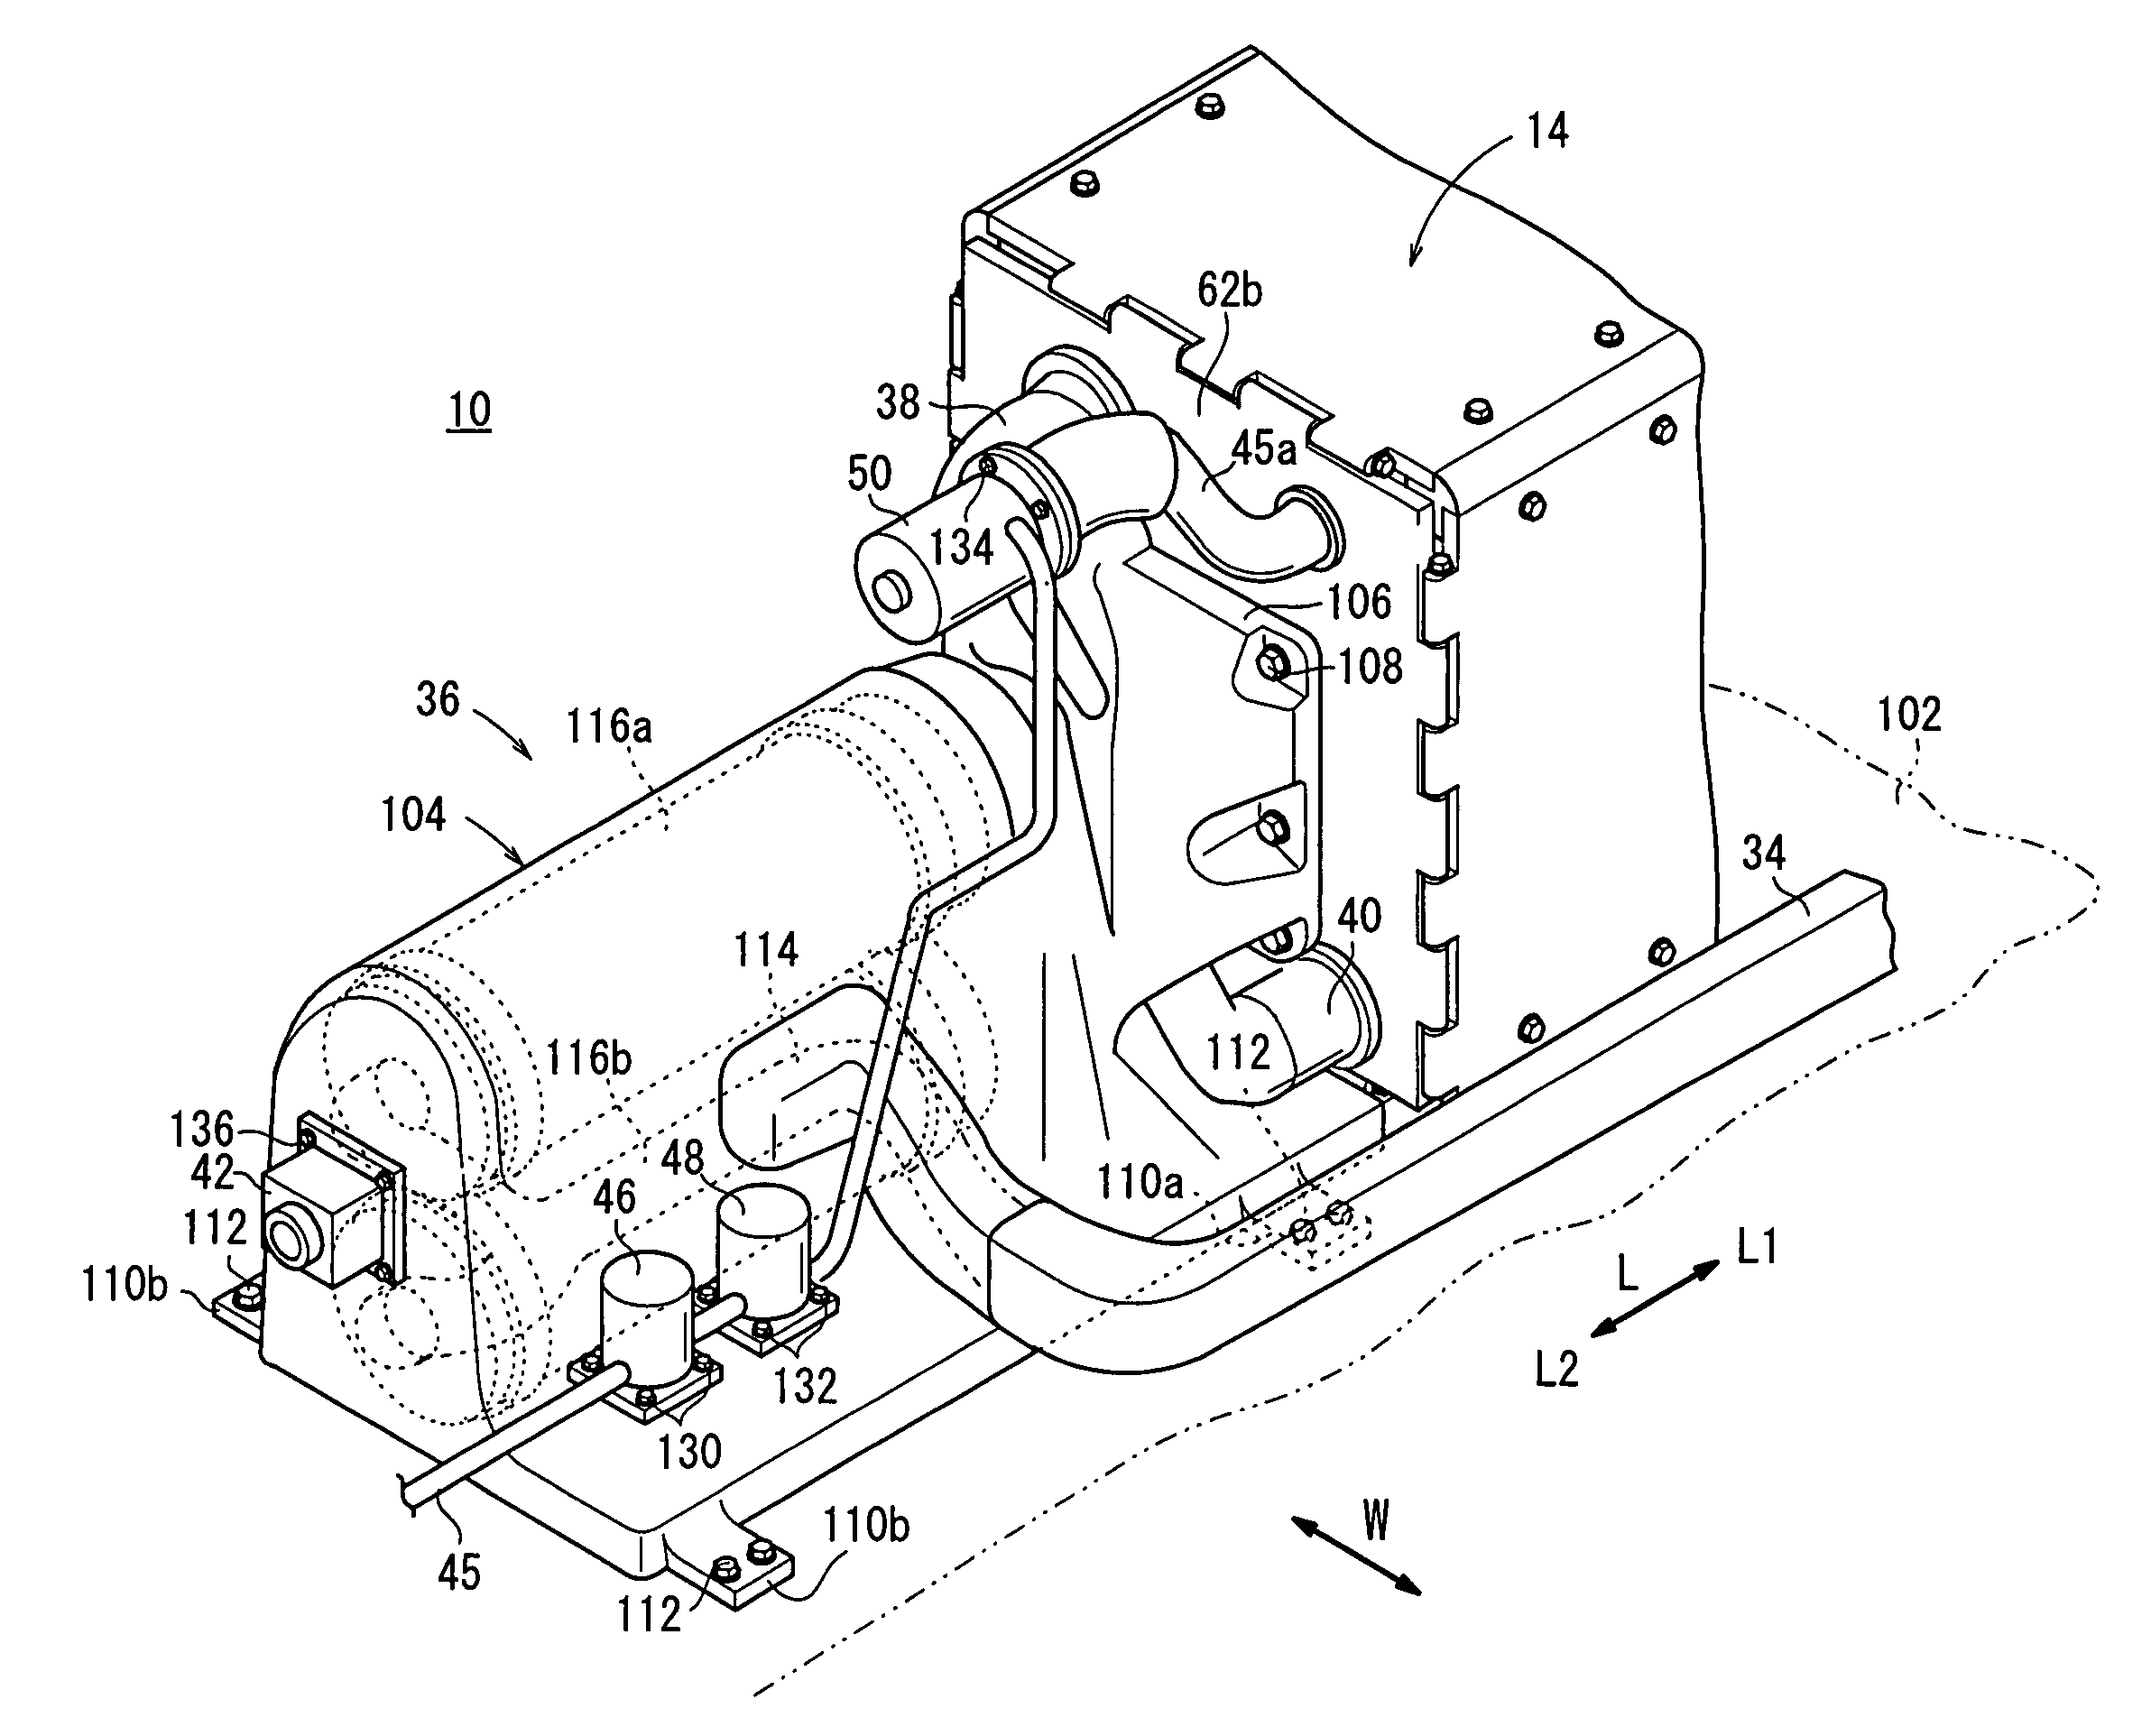 In-vehicle fuel cell system